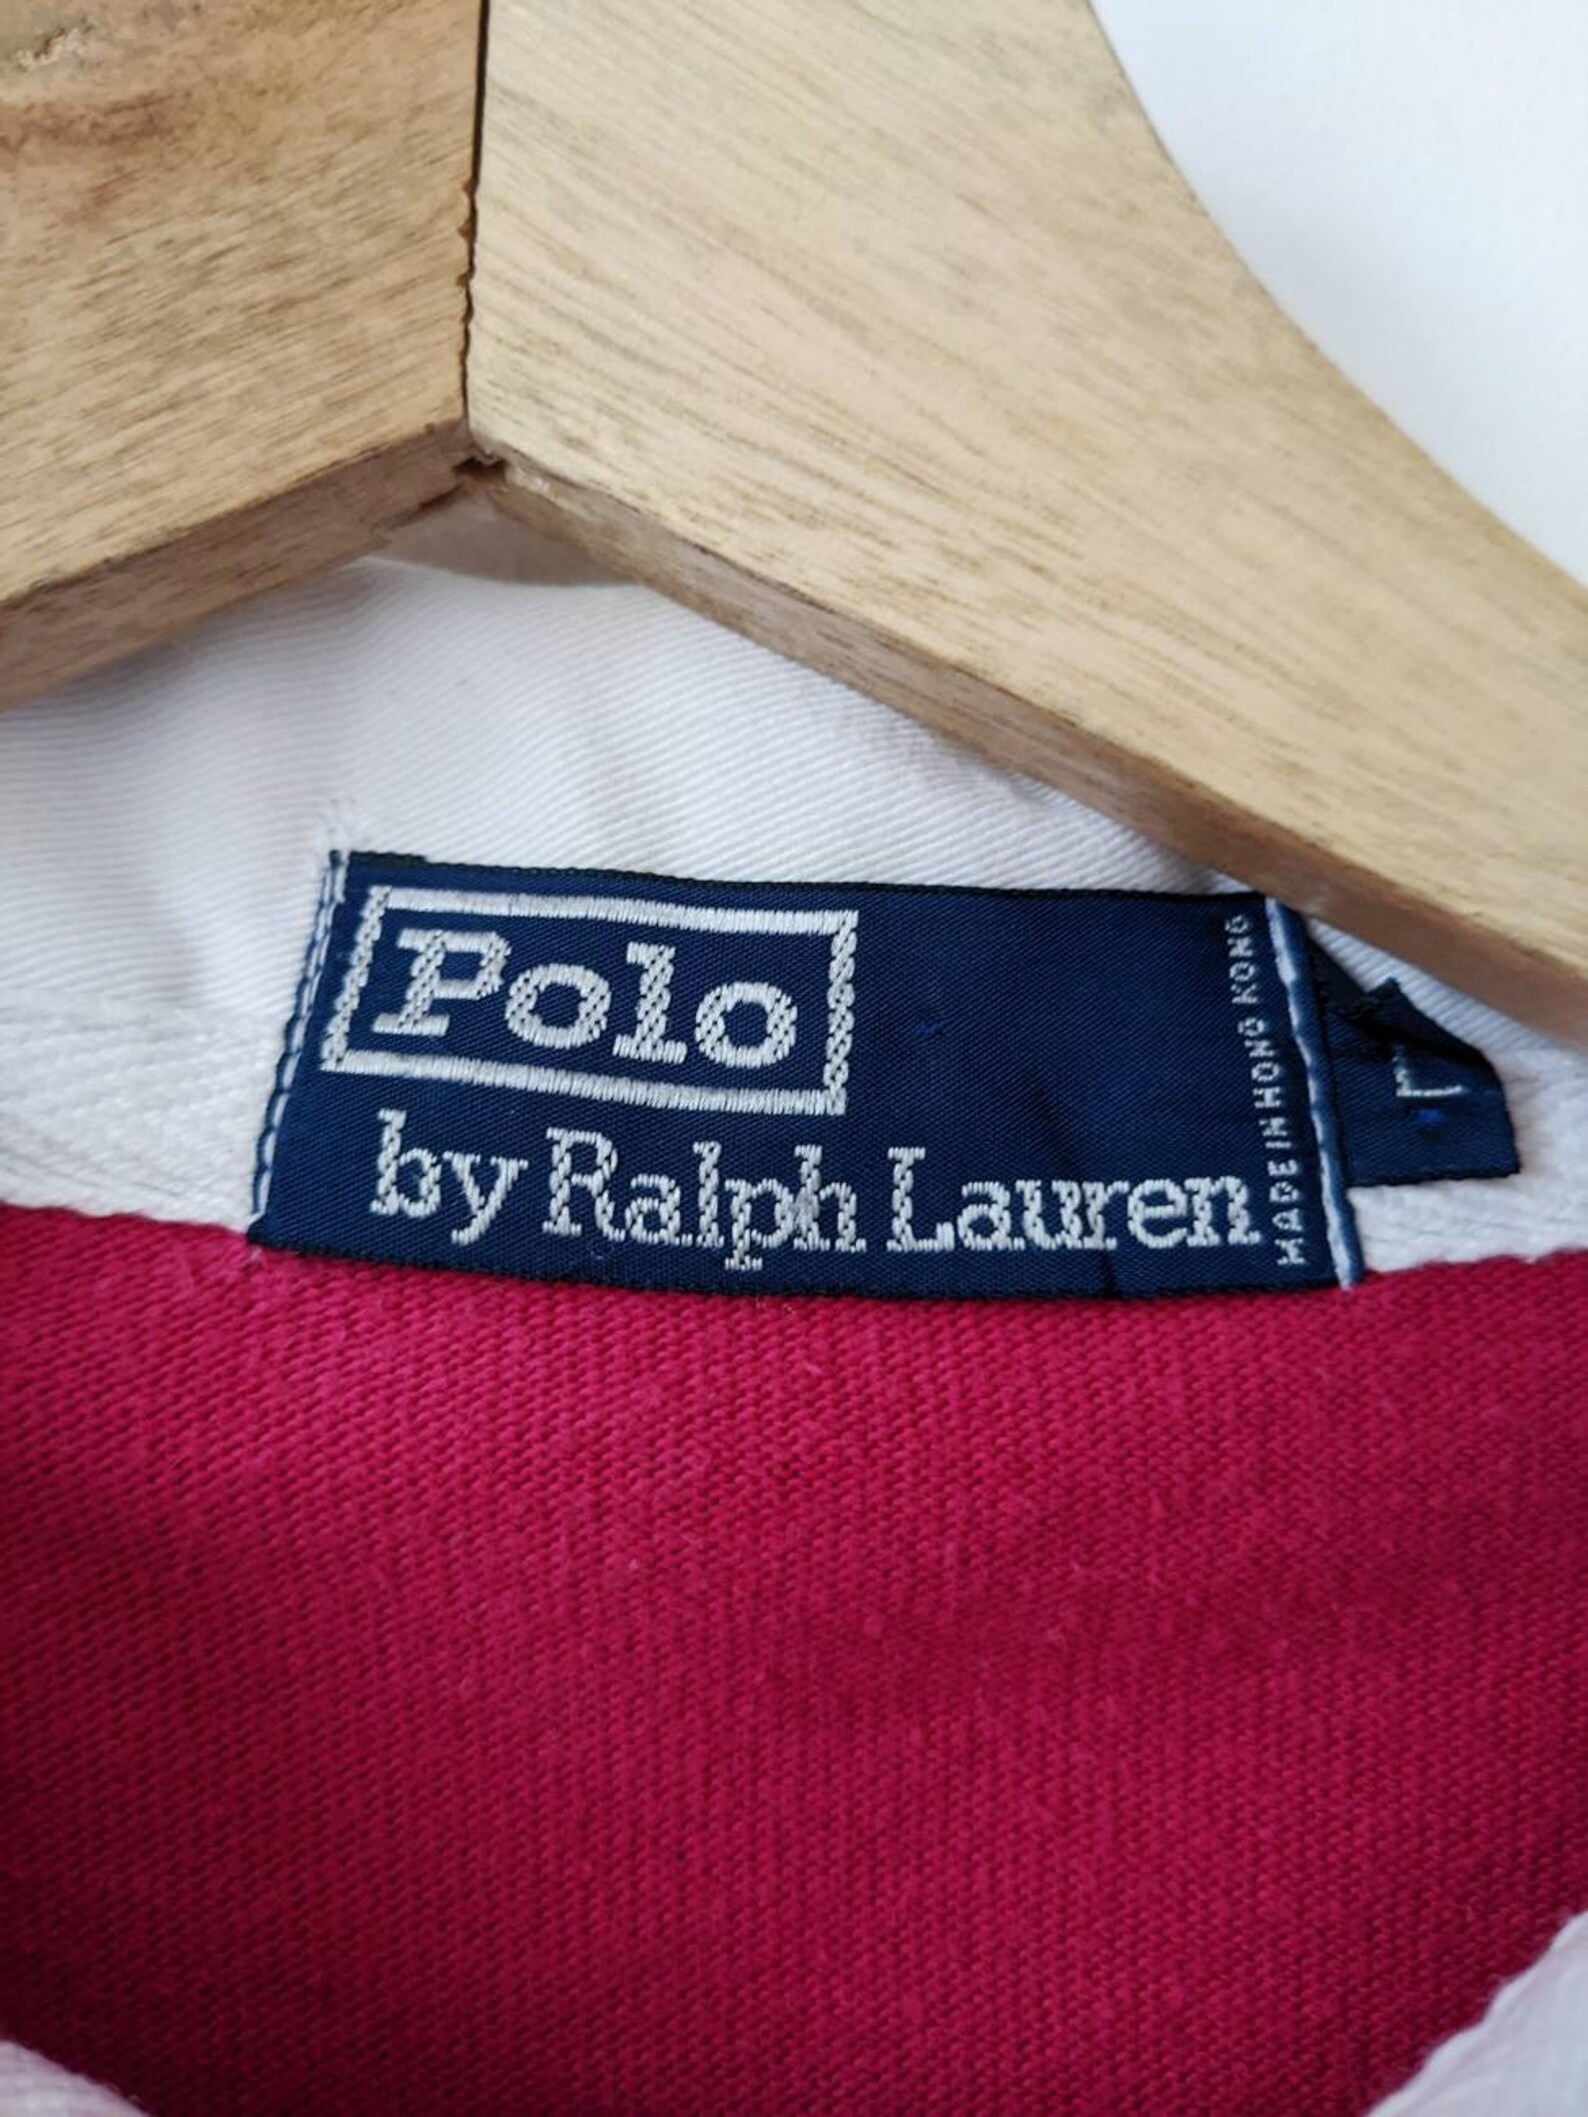 Vintage Polo Ralph Lauren Rugby Shirt Striped 90s L - Etsy